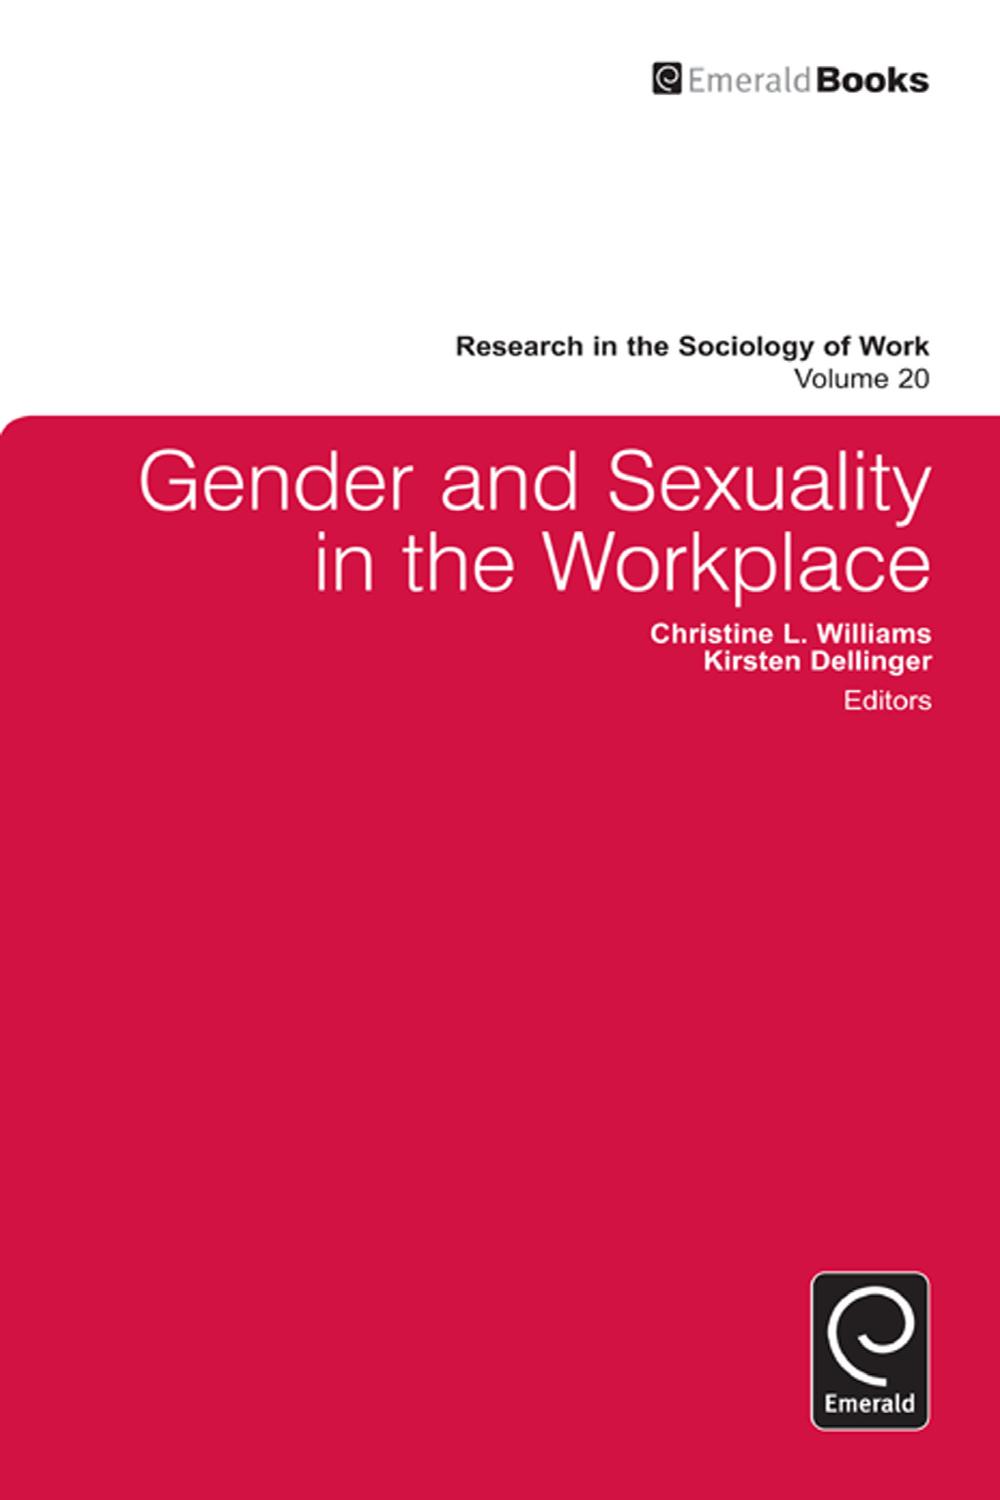 Gender and Sexuality in the Workplace - Christine Williams, Kirsten Dellinger